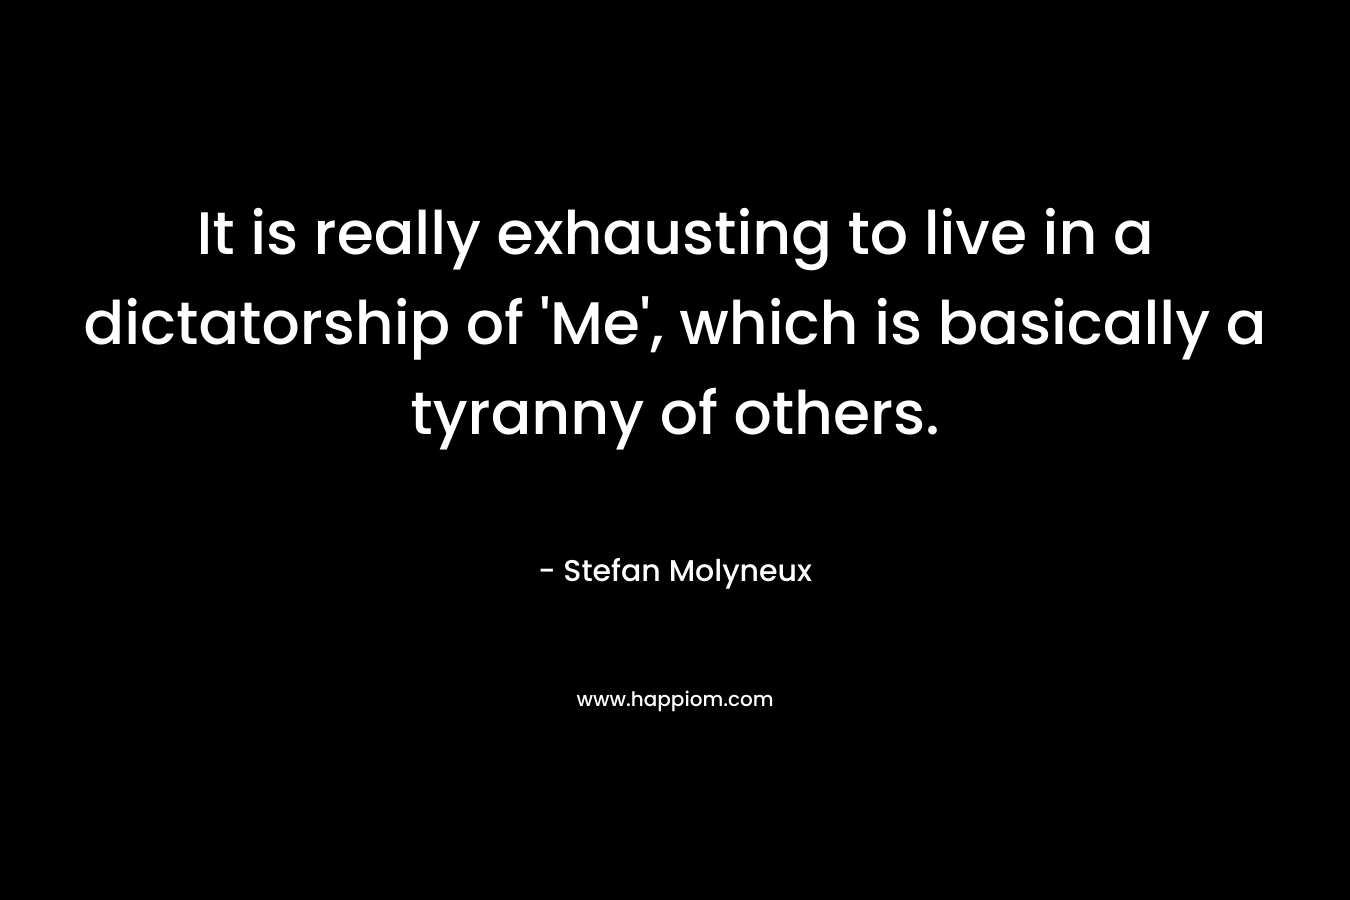 It is really exhausting to live in a dictatorship of ‘Me’, which is basically a tyranny of others. – Stefan Molyneux